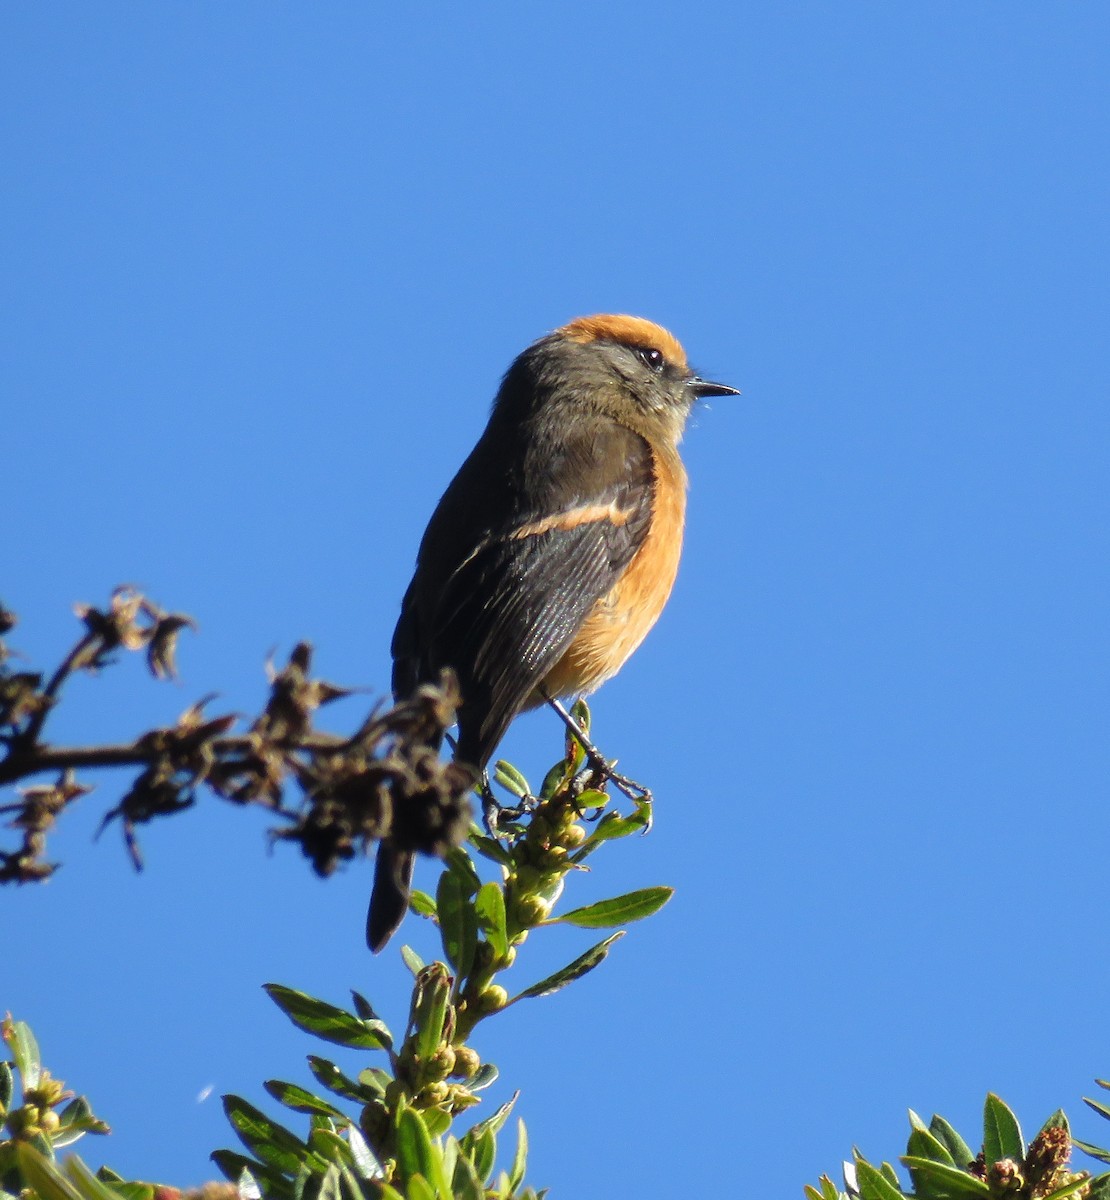 Rufous-browed Chat-Tyrant - Gustavo A. Rodriguez